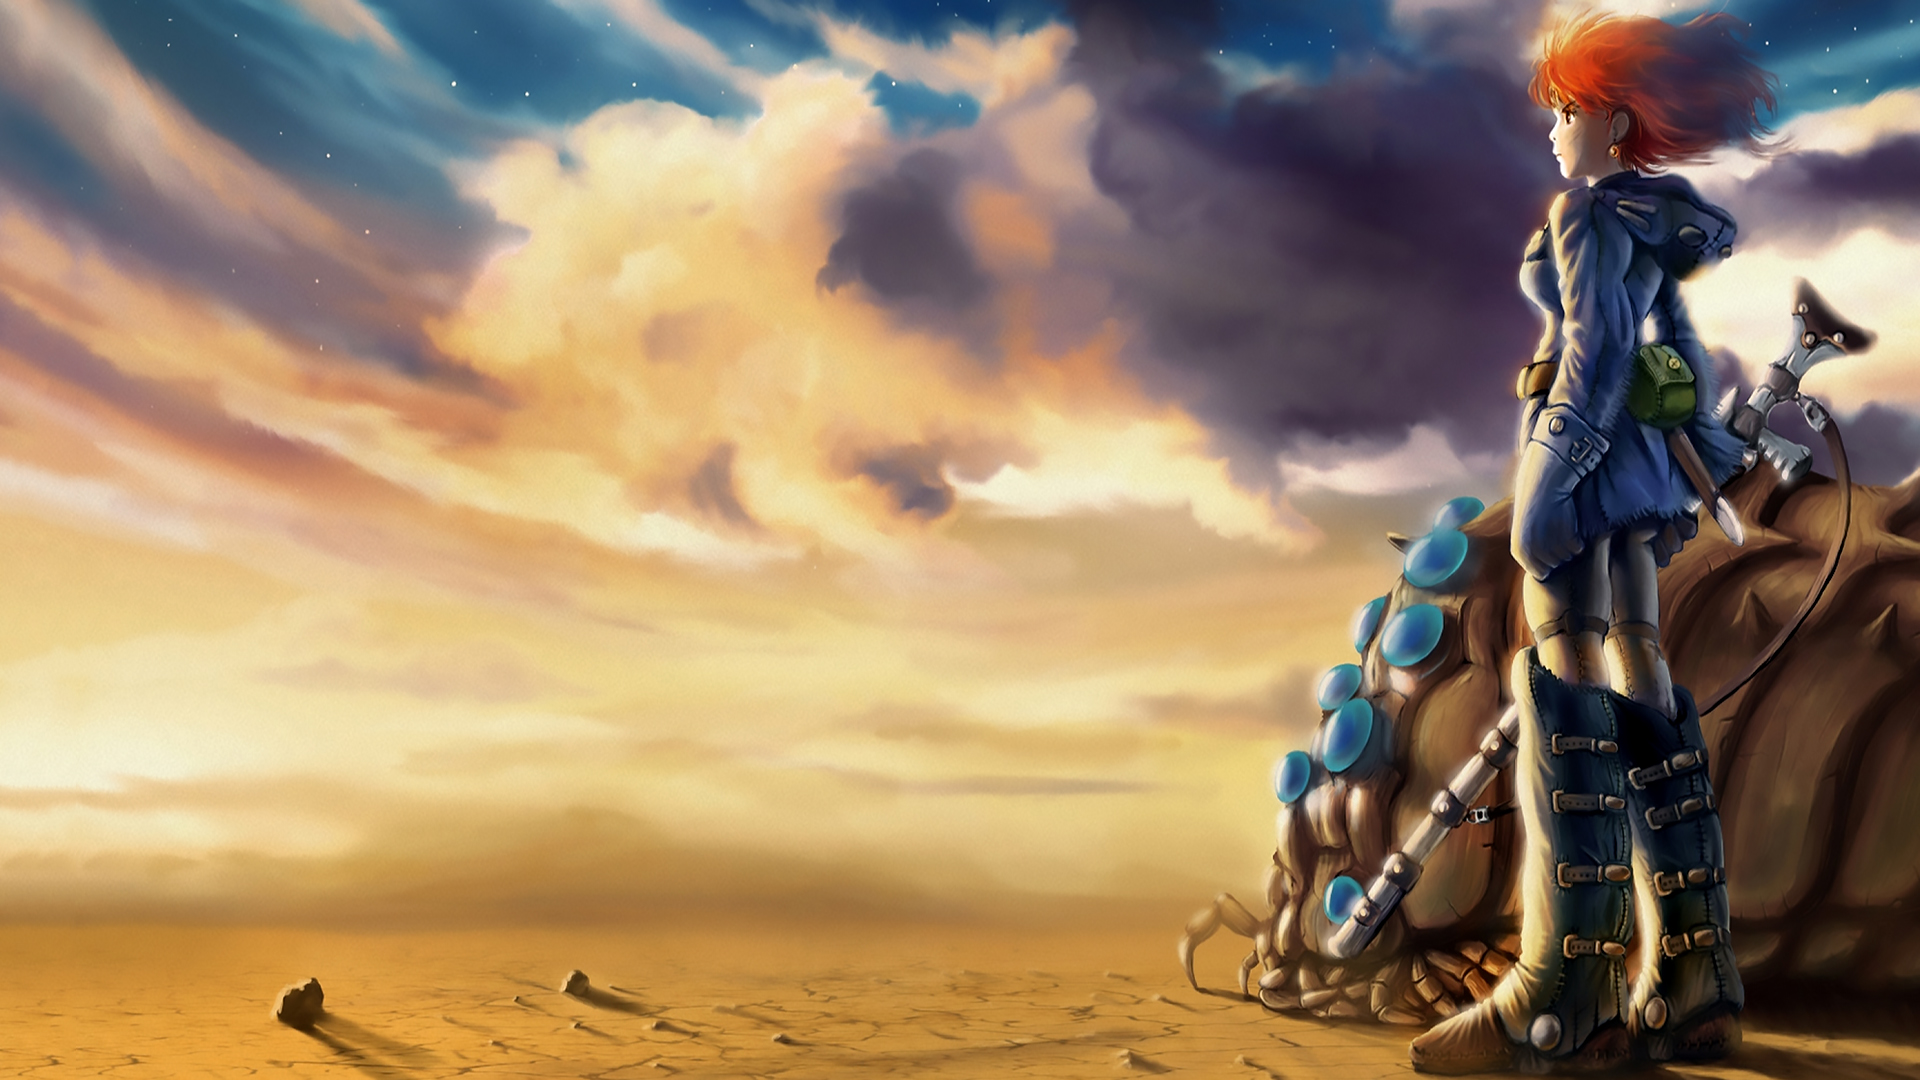 800x1280 Nausicaa Of The Valley Of The Wind Nausicaa Desert Nexus 7 Samsung Galaxy Tab 10 Note Android Tablets Wallpaper Hd Anime 4k Wallpapers Images Photos And Background Wallpapers Den